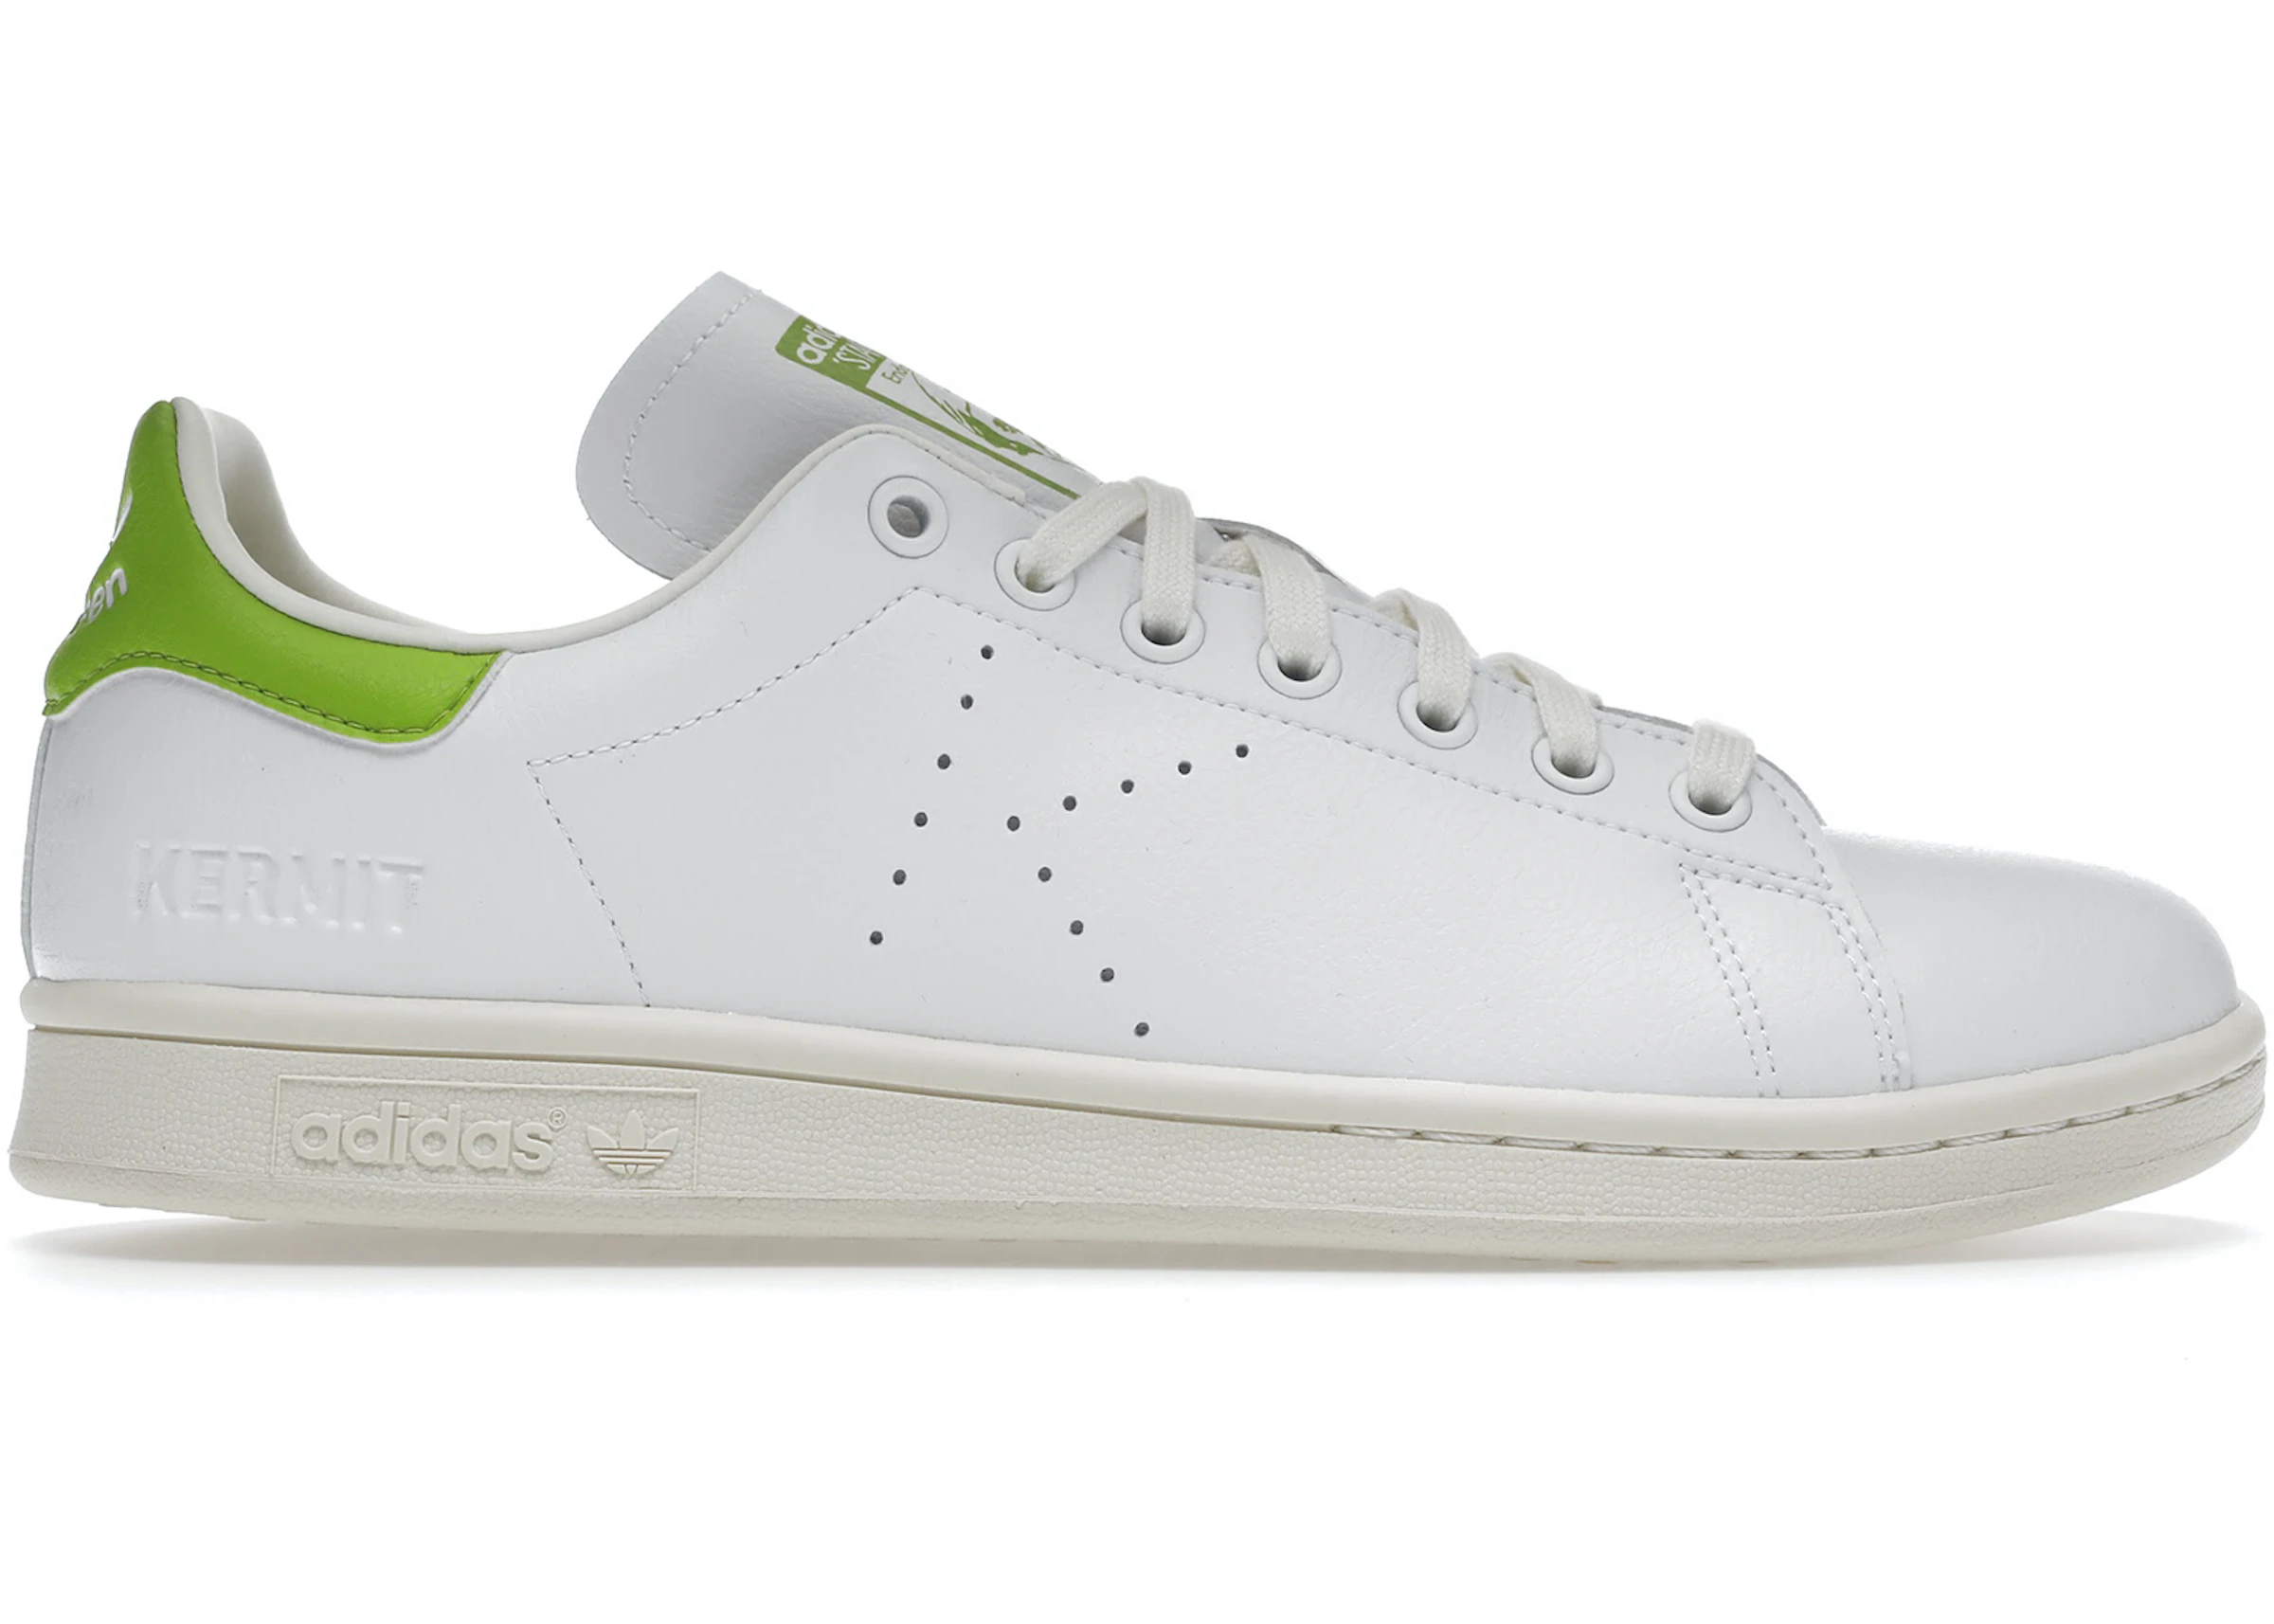 Ruddy Disgrace Frown Buy Adidas Stan Smith for Men and Women